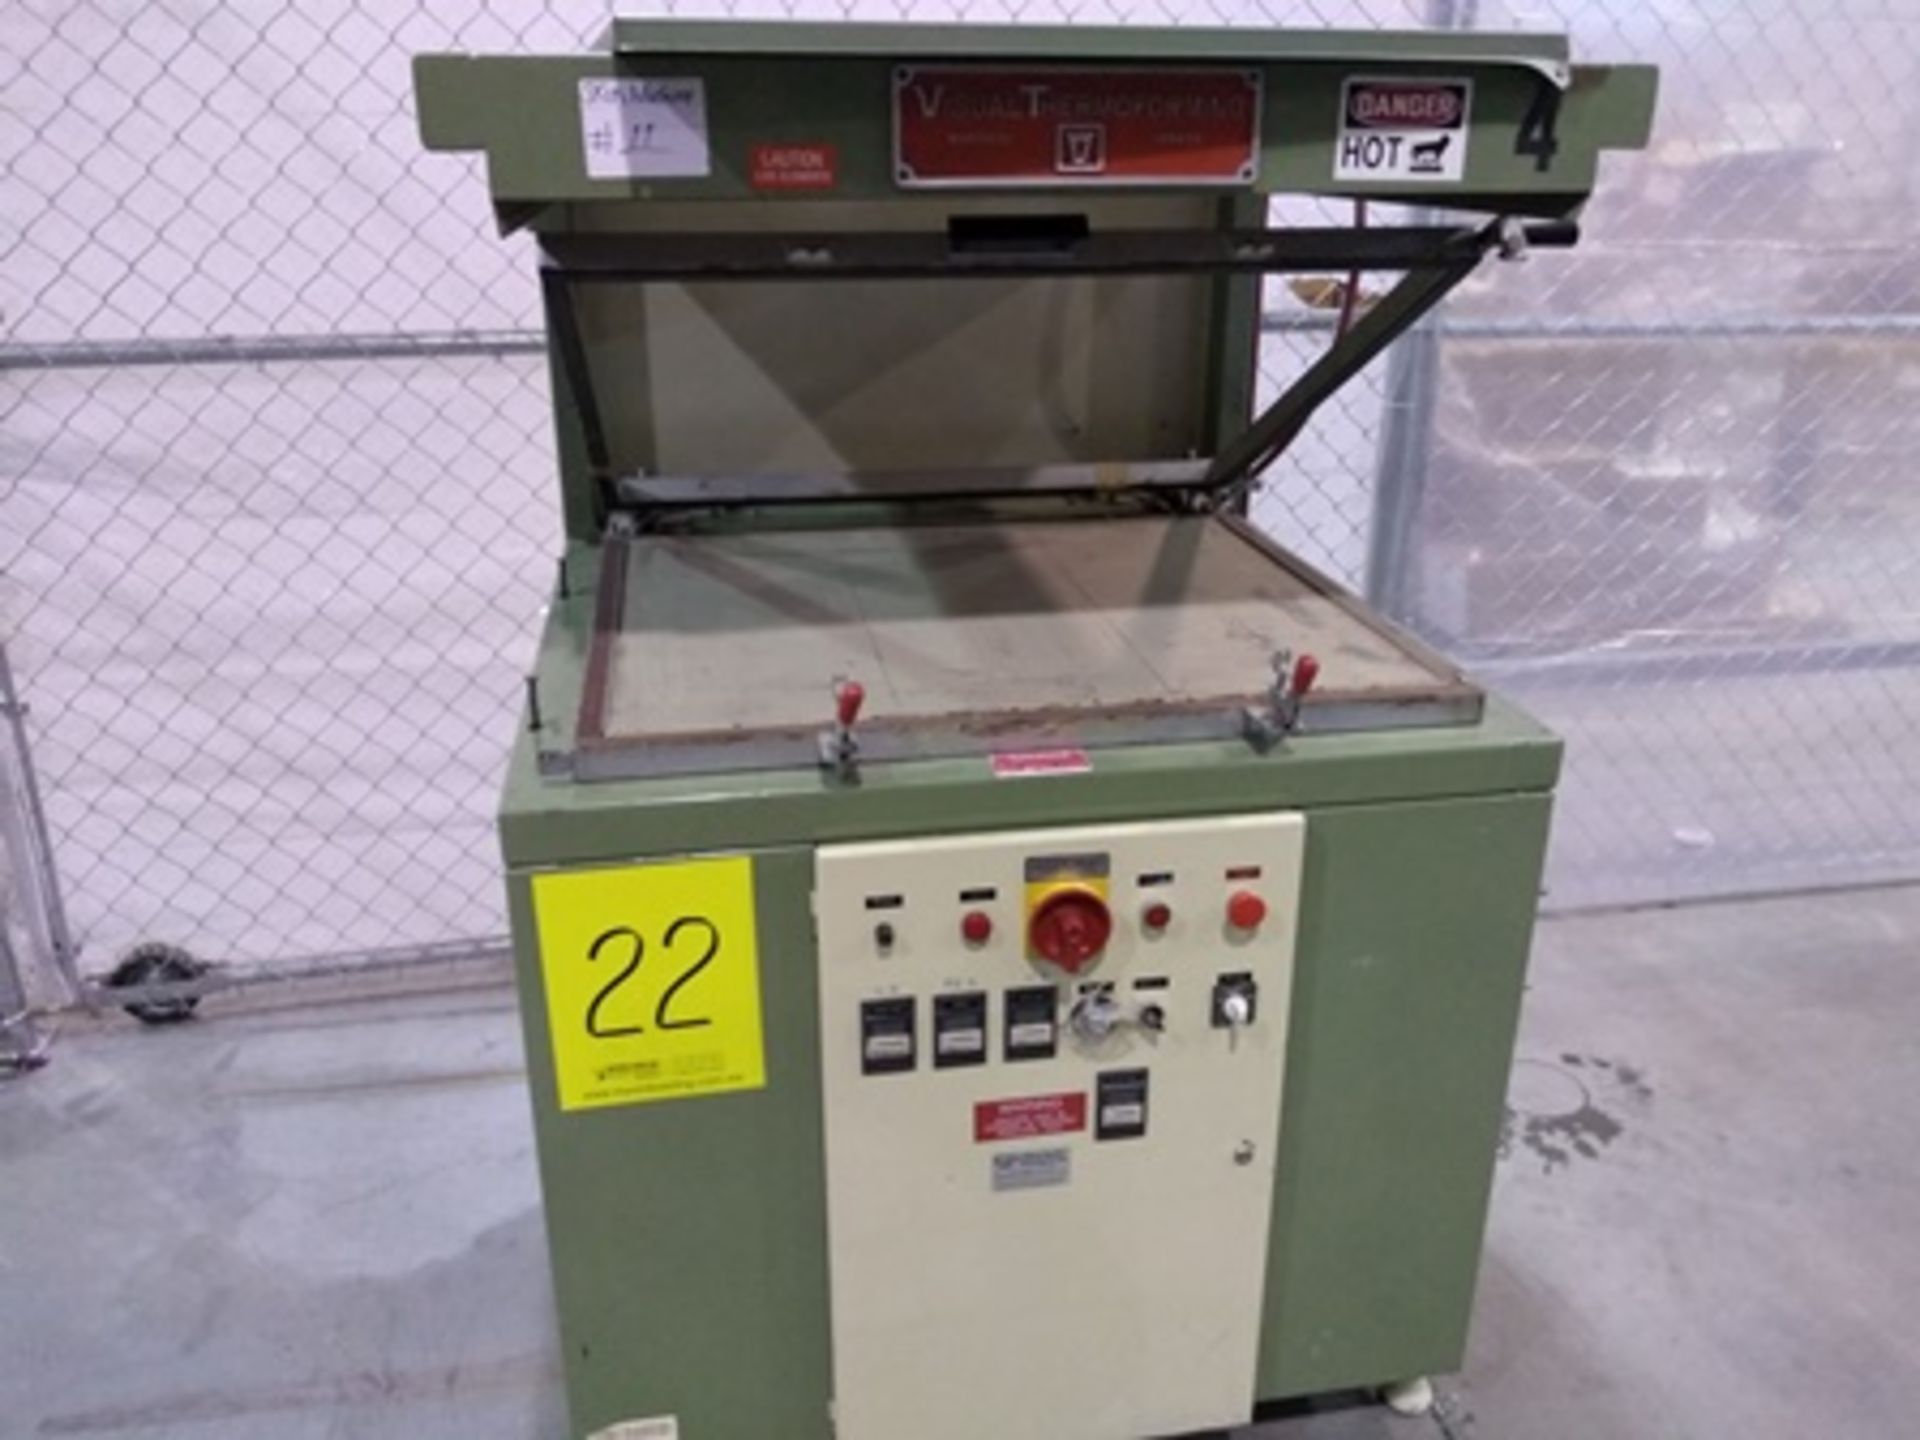 Visual Thermoforming model CT3036 skin packager, S/N CT3495, 220V, 3PH, 60HZ, 27.5x35 inch...